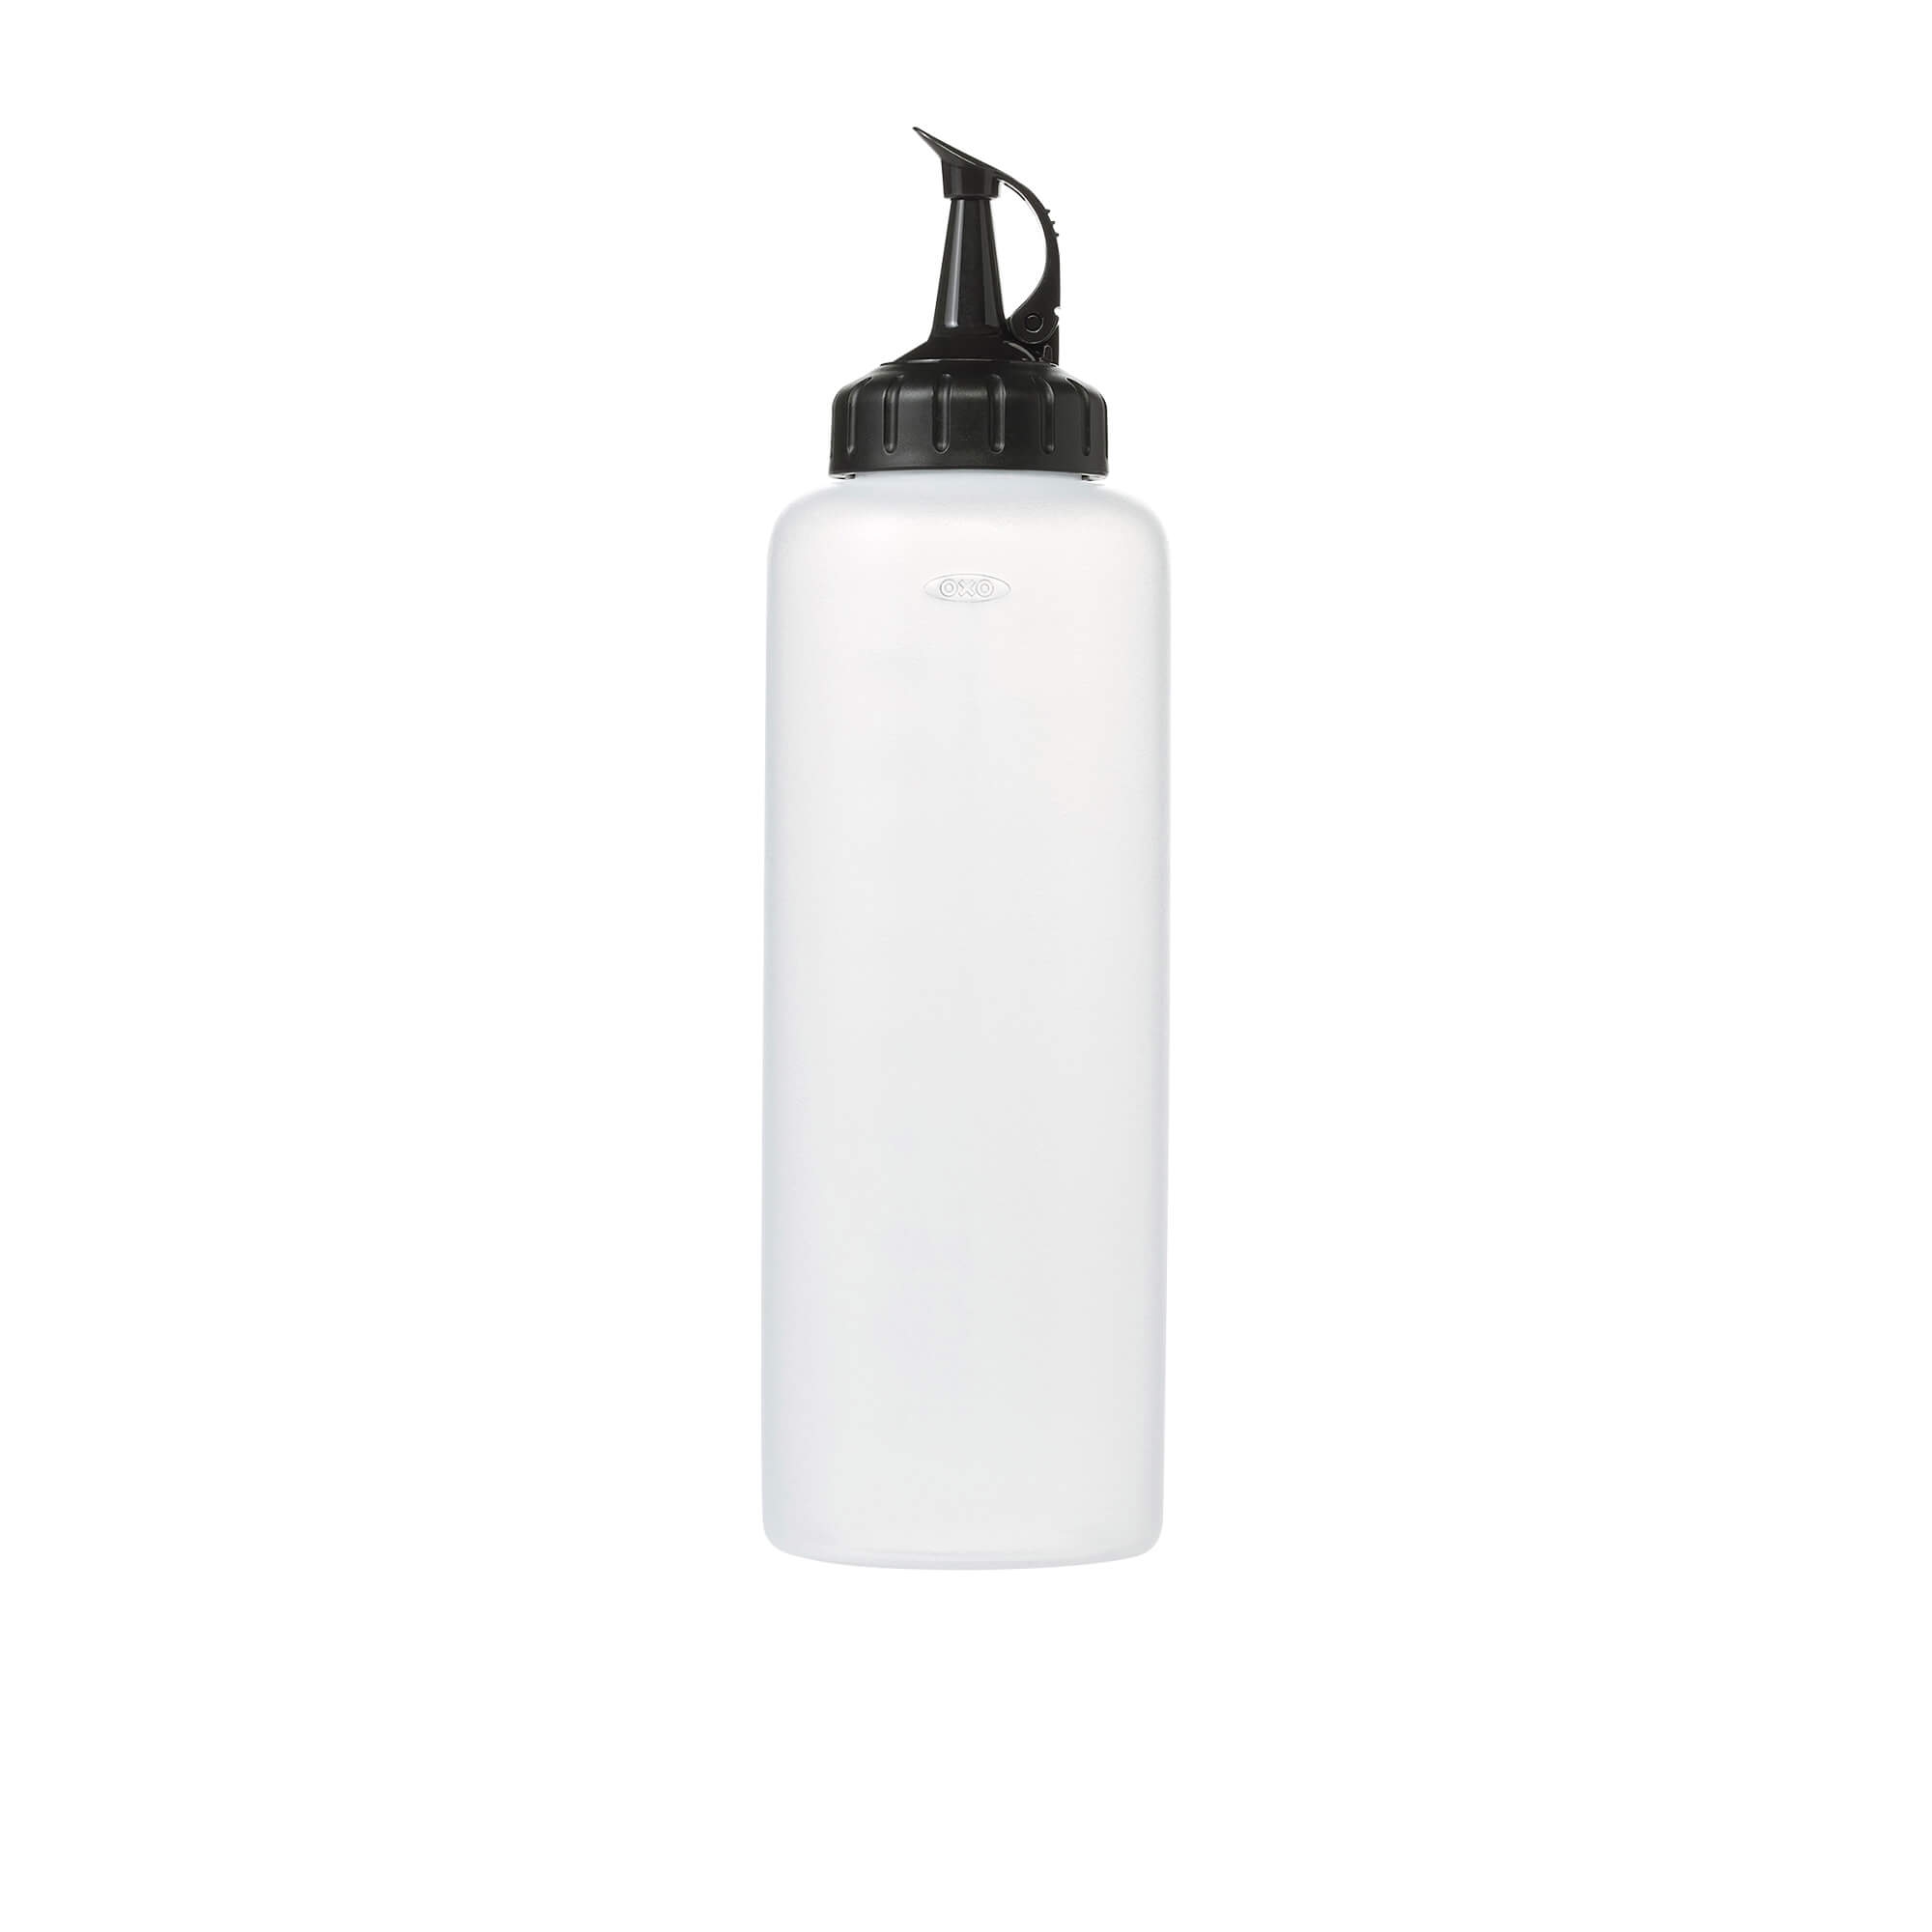 OXO Good Grips Chef's Squeeze Bottle Large Image 1